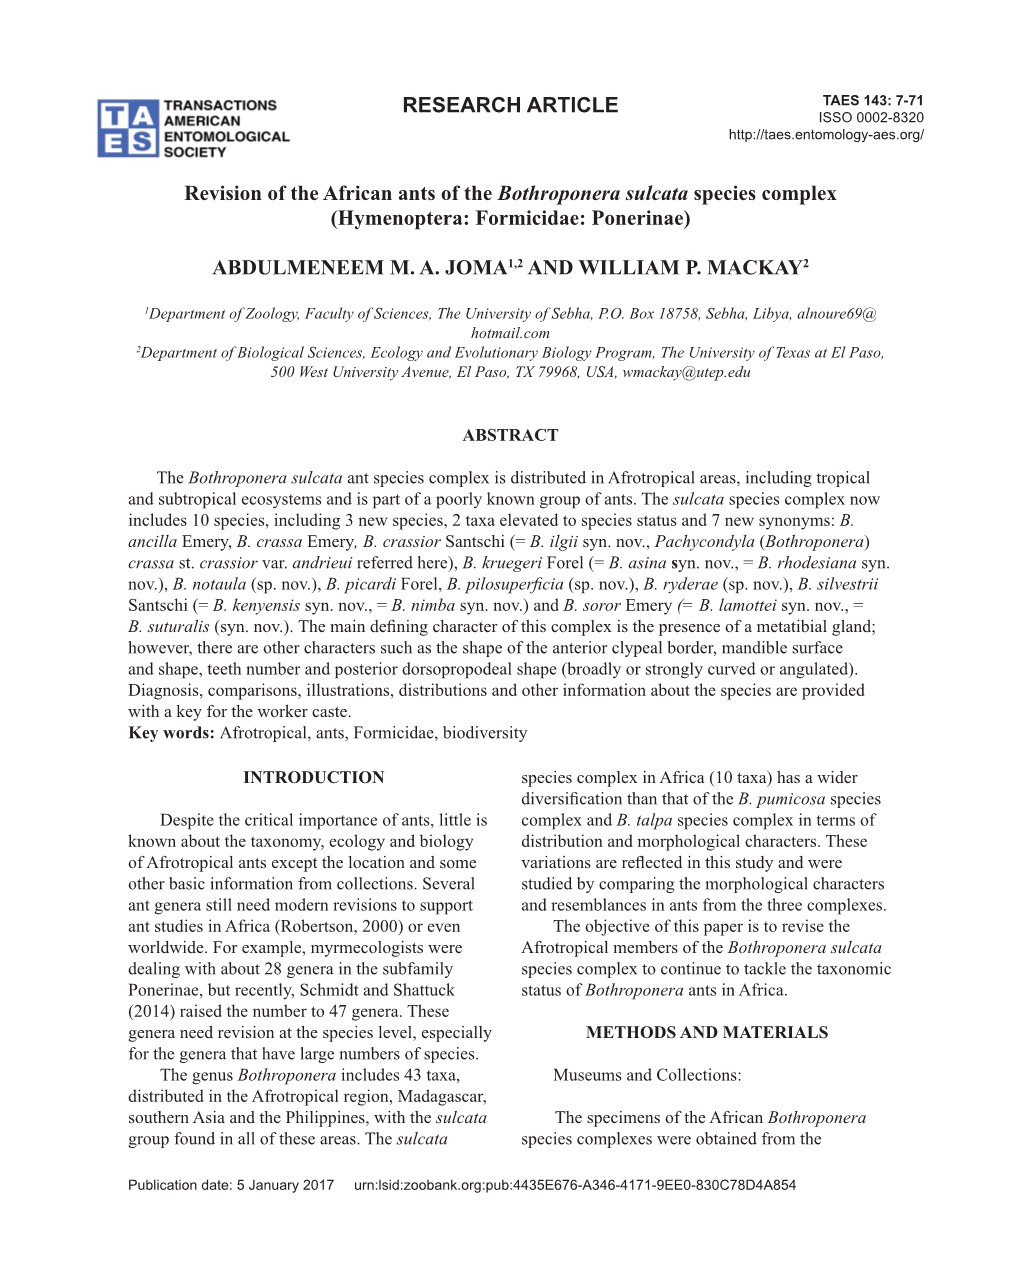 RESEARCH ARTICLE Revision of the African Ants of The